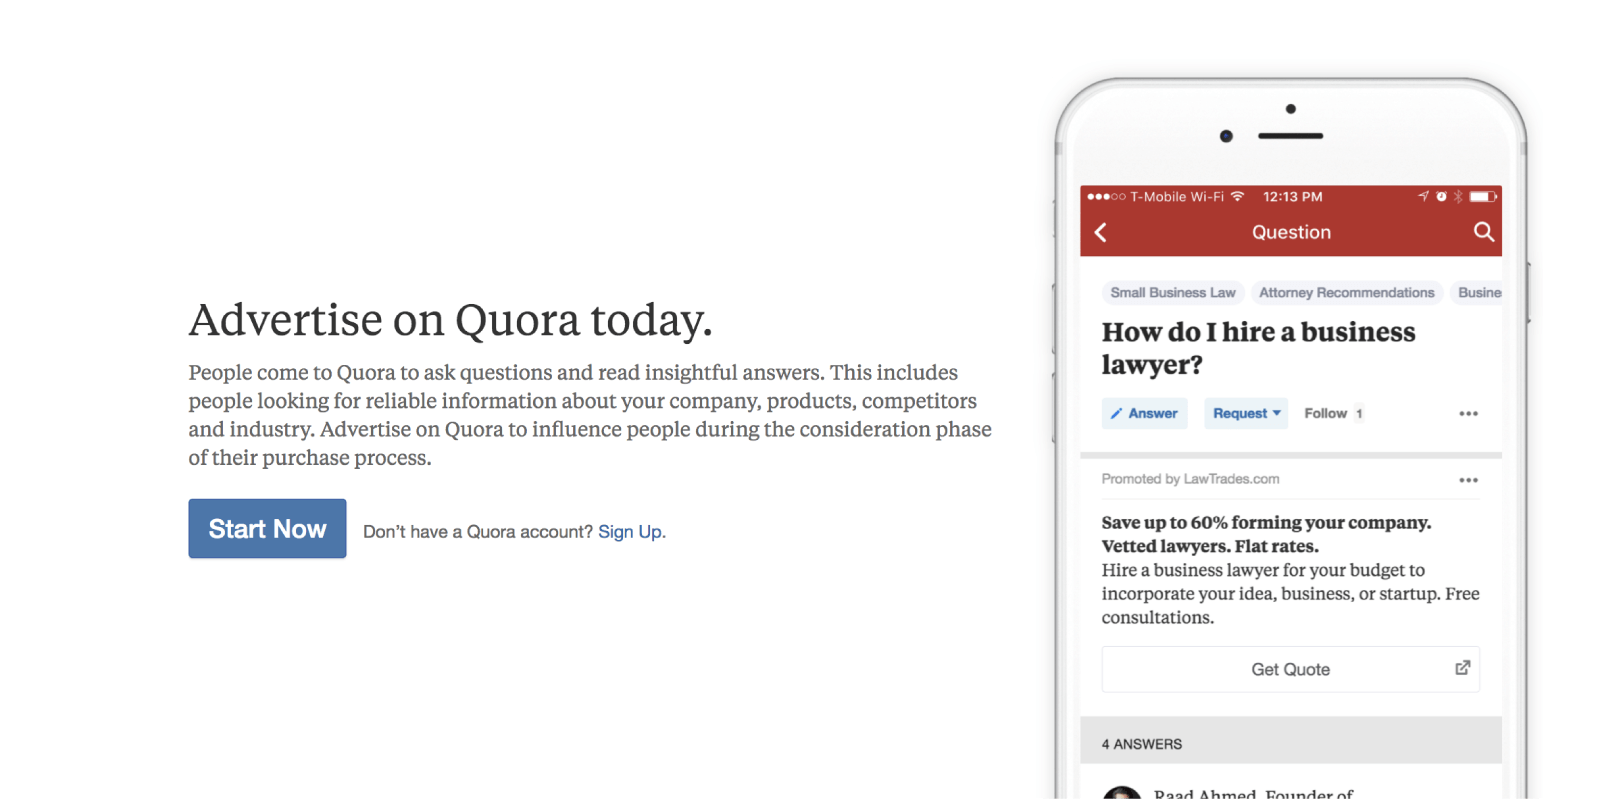 Start an advertising campaign by going to www.quora.com/business